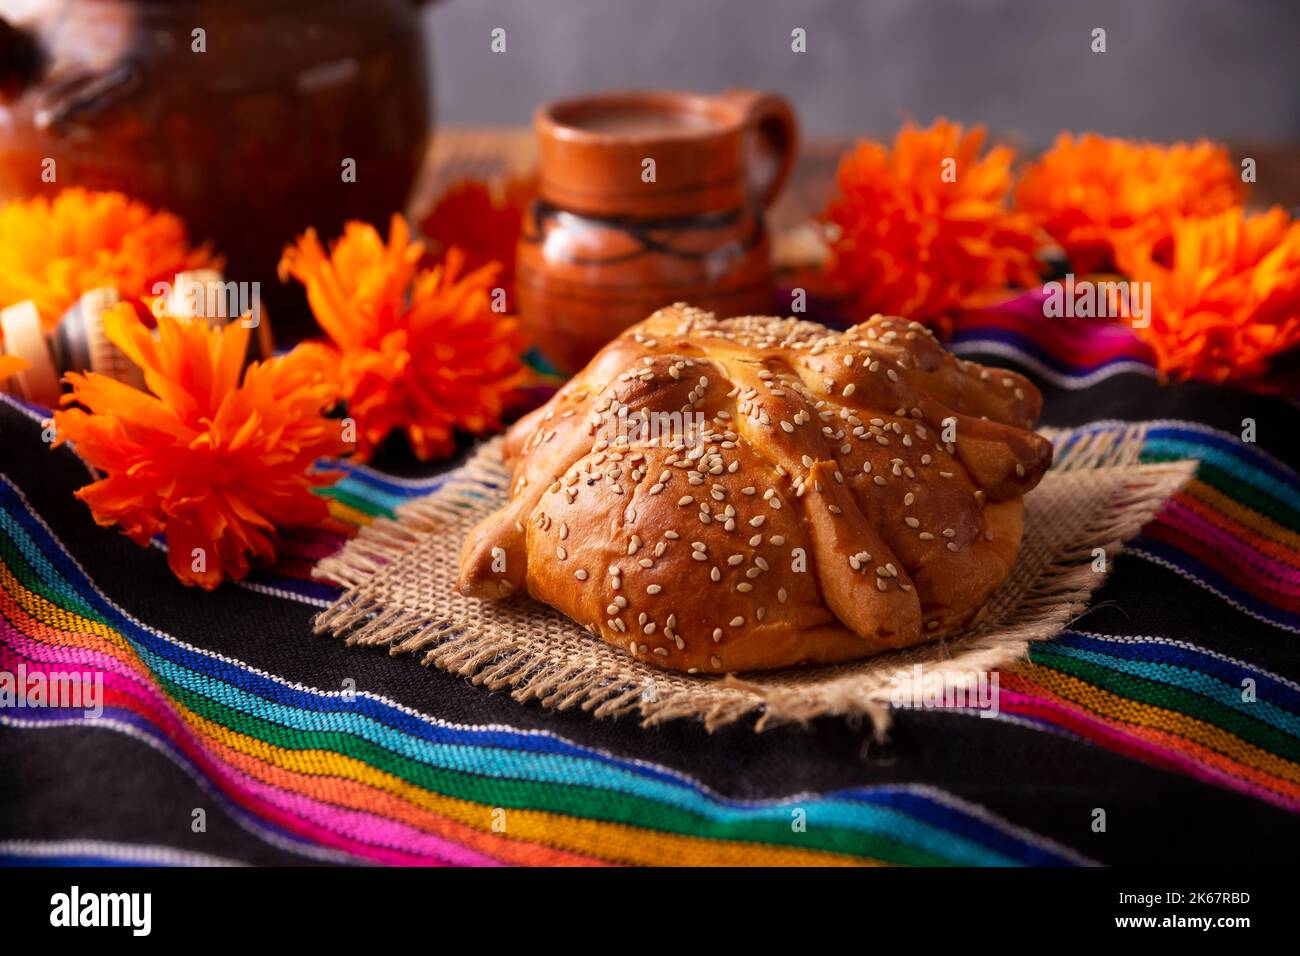 https://c8.alamy.com/comp/2K67RBD/pan-de-muerto-typical-mexican-sweet-bread-with-sesame-seeds-that-is-consumed-in-the-season-of-the-day-of-the-dead-it-is-a-main-element-in-the-altar-2K67RBD.jpg